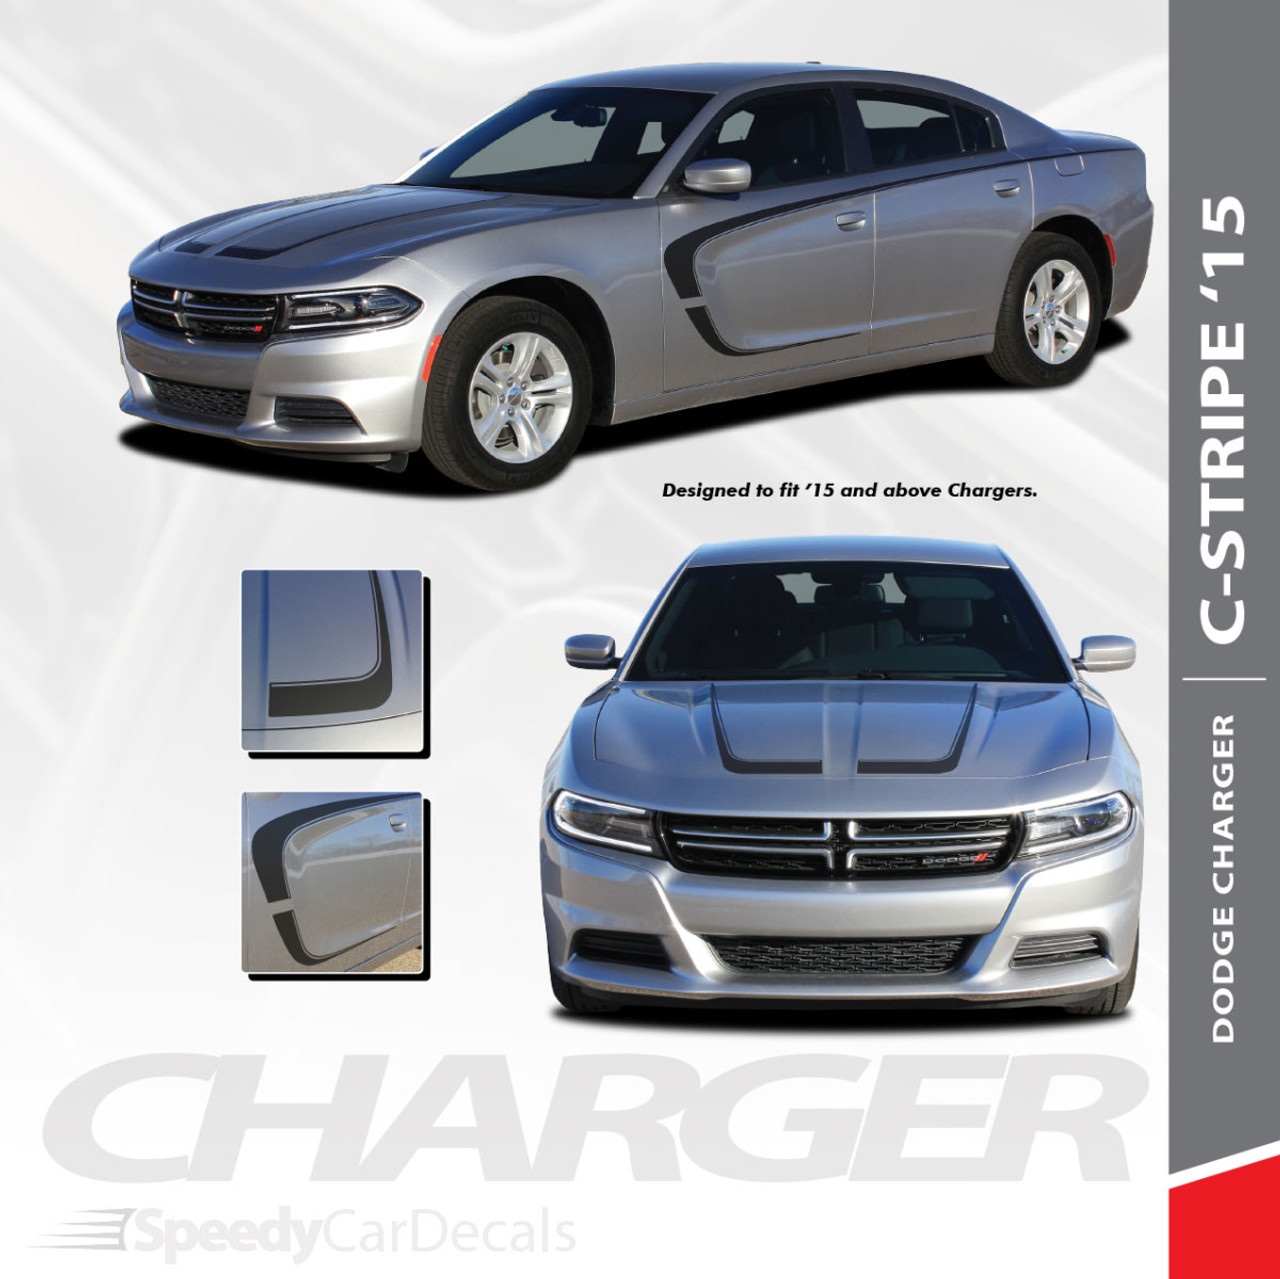 C STRIPE | 2015-2022 2023 Dodge Charger RT Decals Hood & Side 3M Premium  Auto Striping - SpeedyCarDecals - Fast Car Decals, Auto Decals, Auto Stripes,  Vehicle Specific Graphics